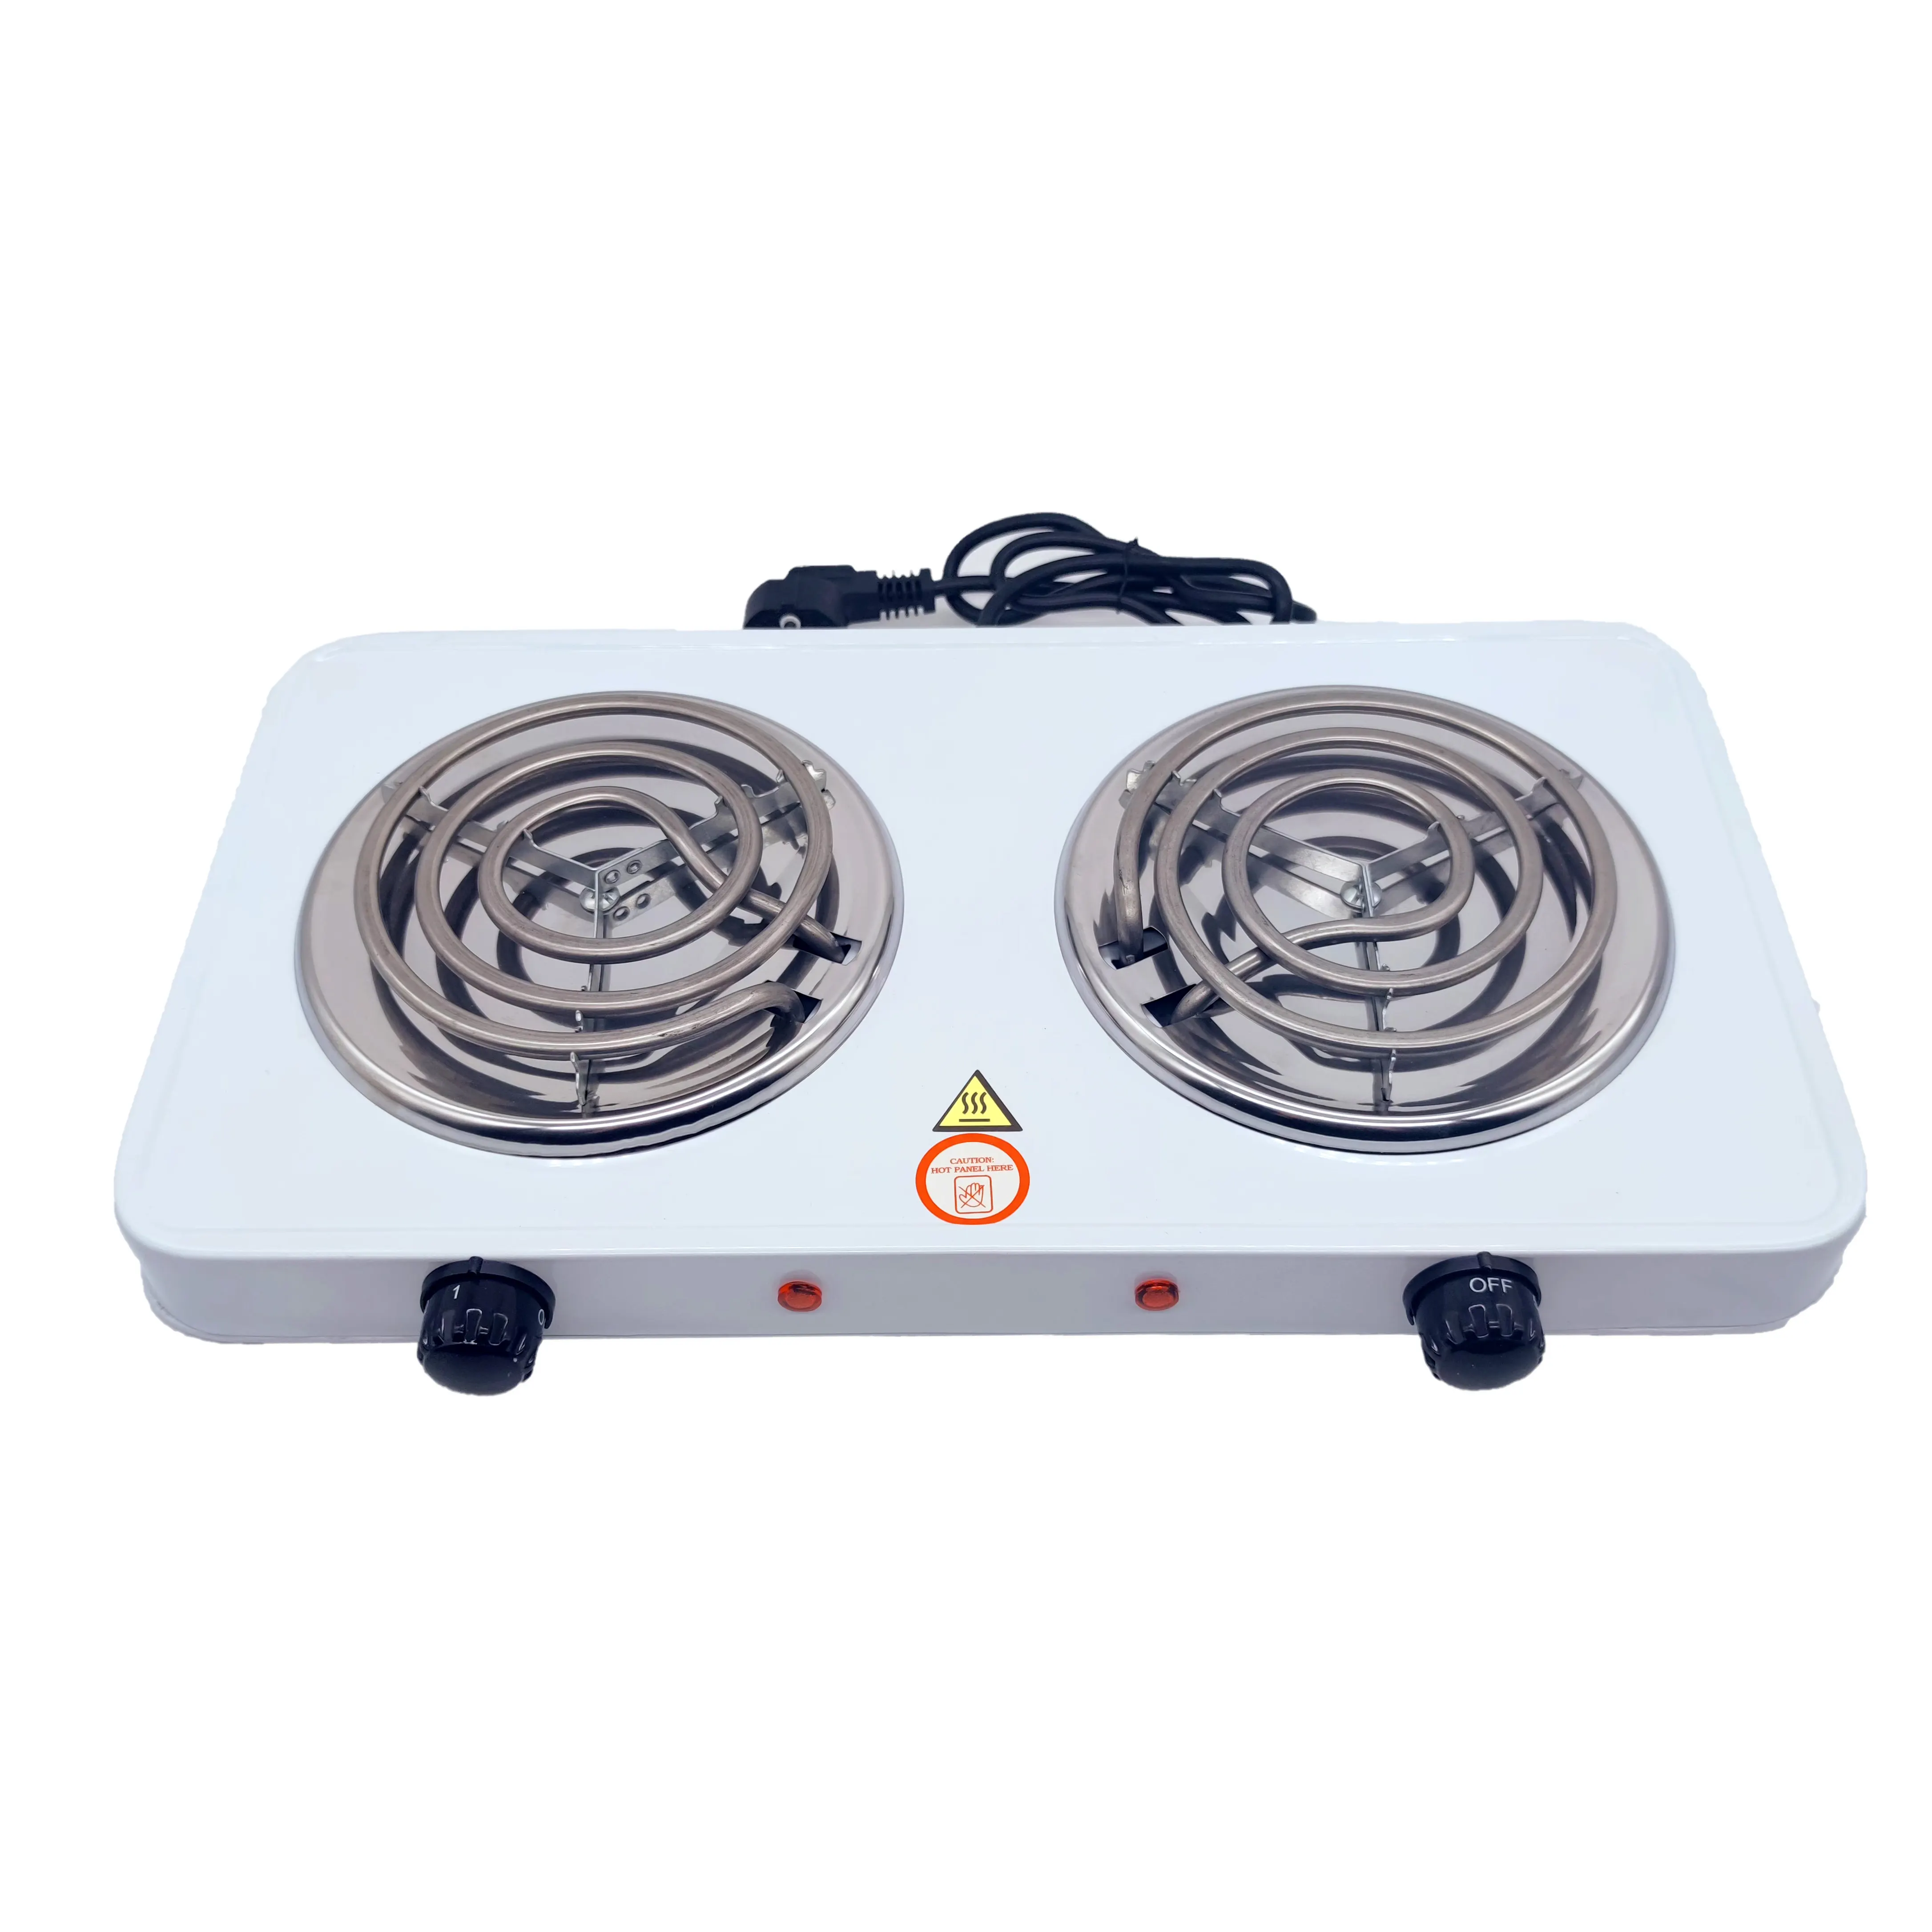 Portable Electric Stove 2000W Hot Plate Cooker 2 Burner Hot Plate